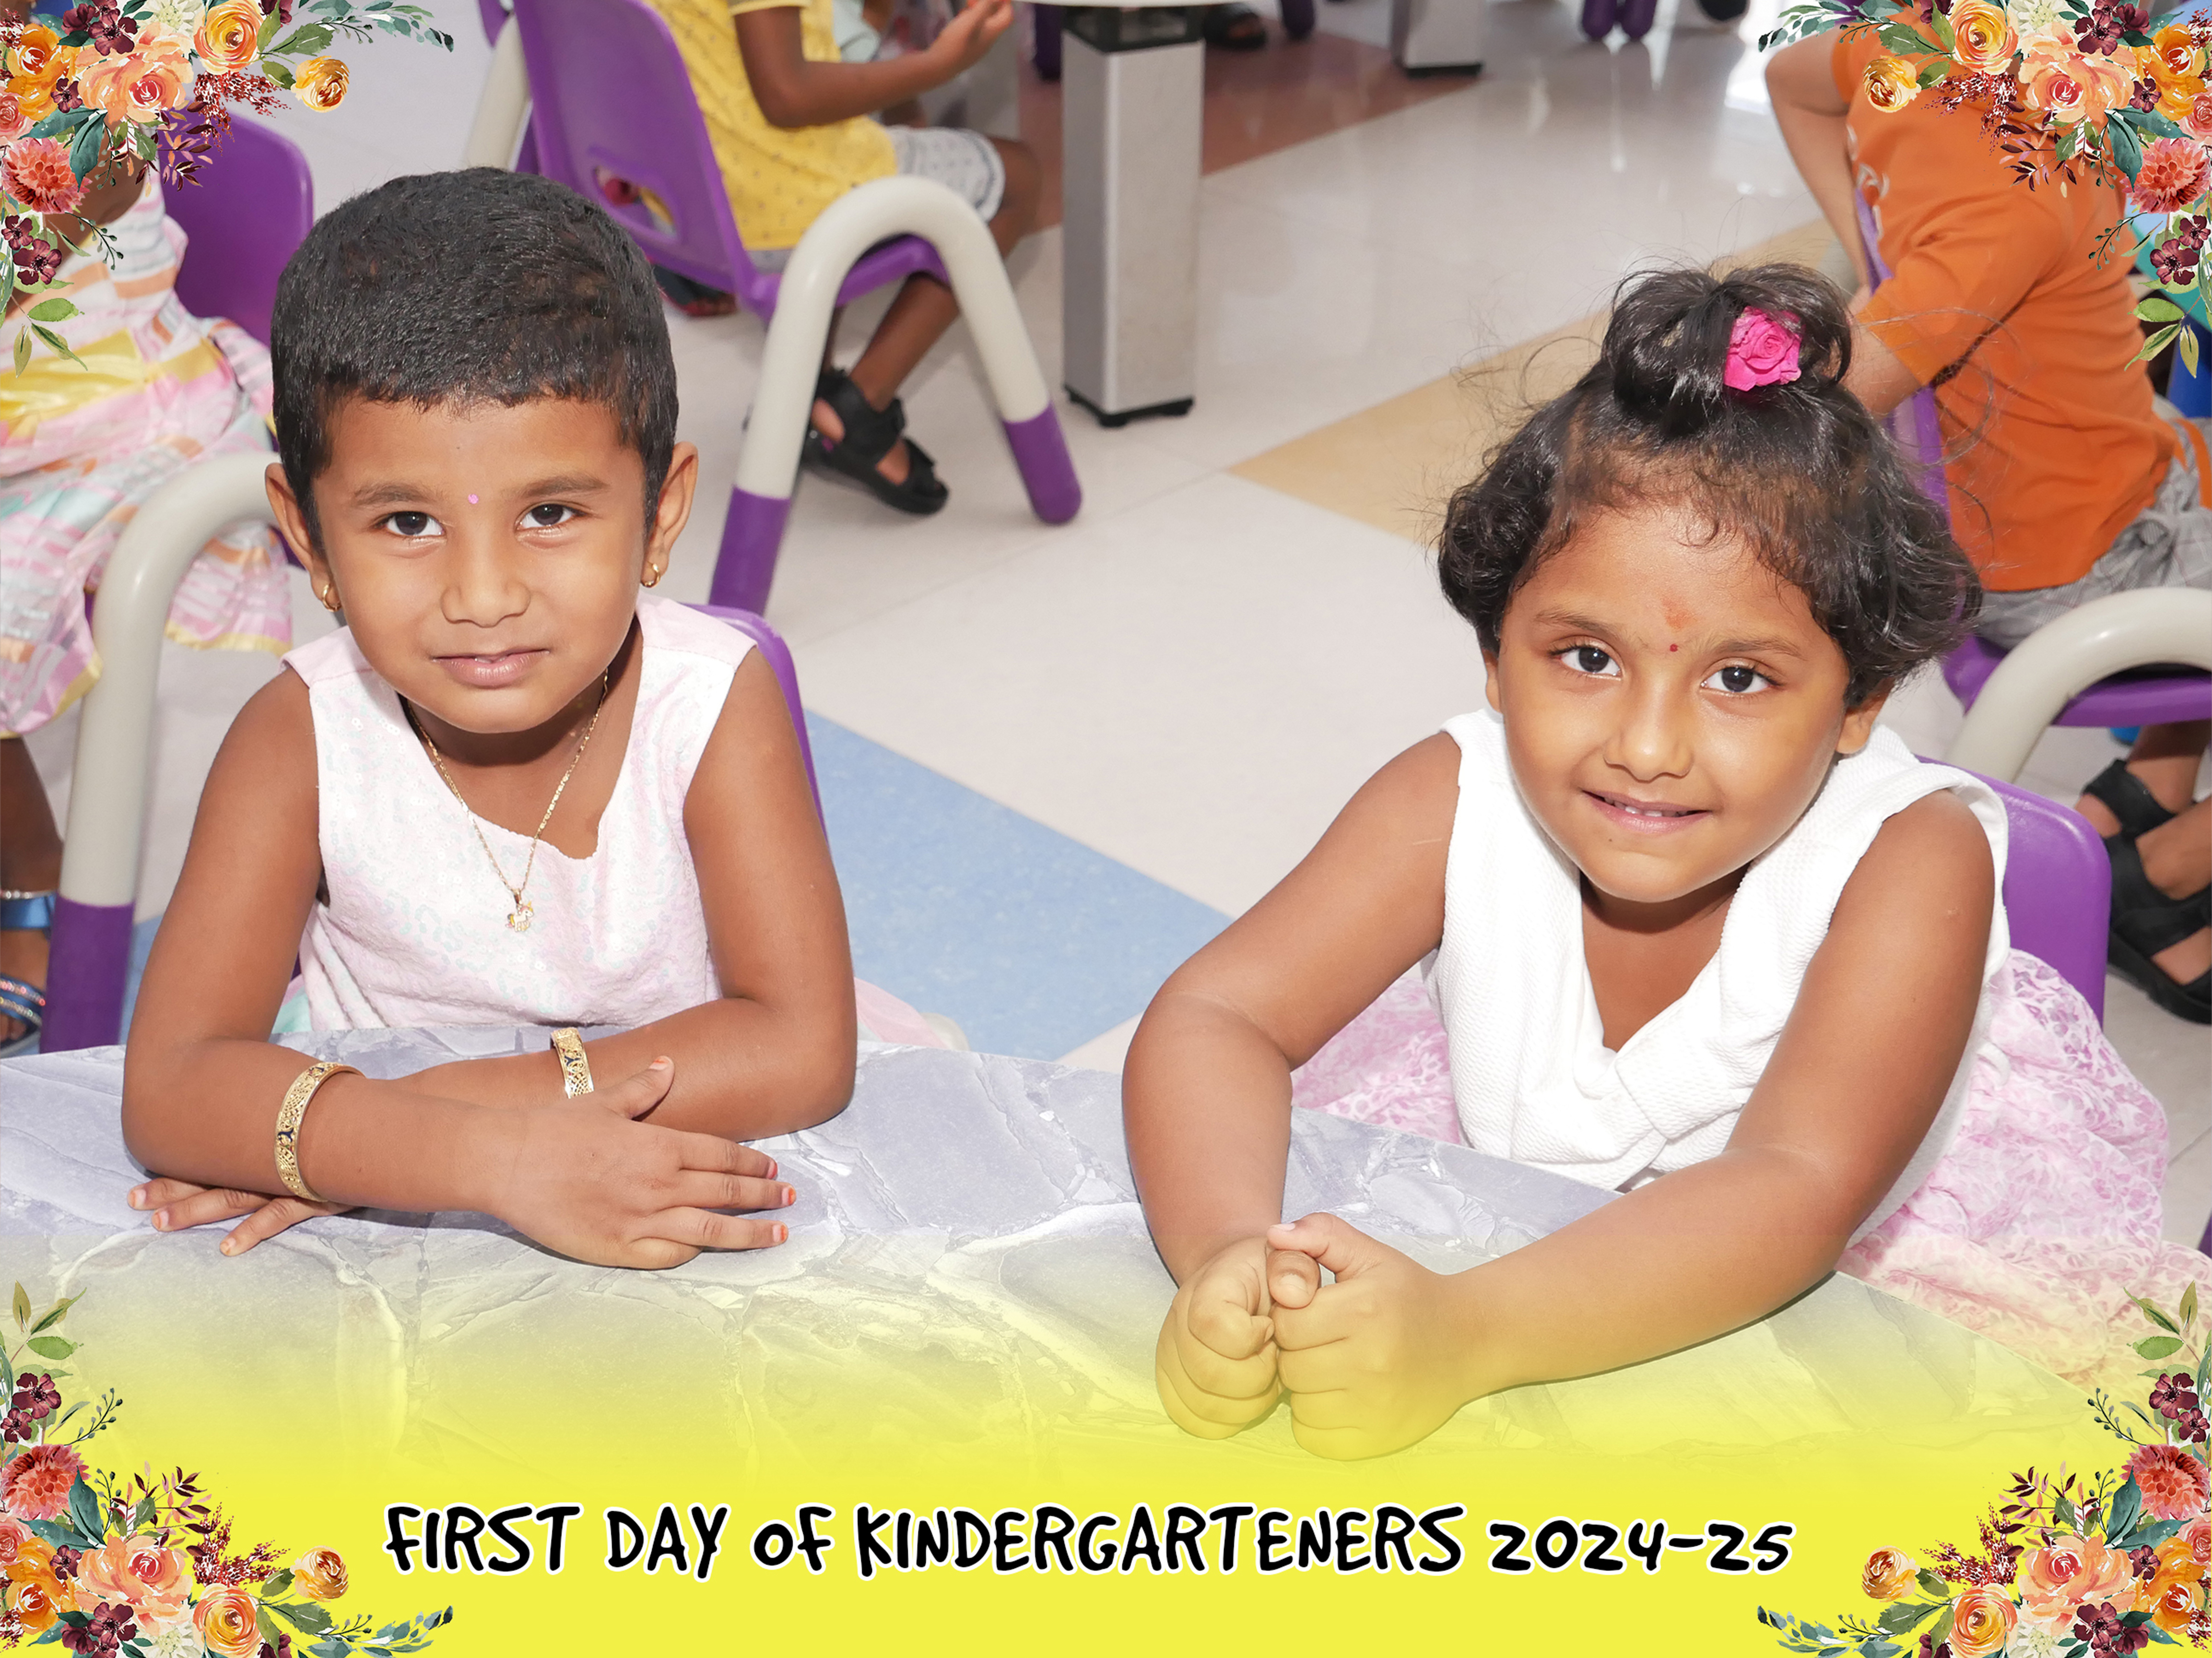 First Day of Kindergarteners 2024-25 at baps school Sathyamangalam